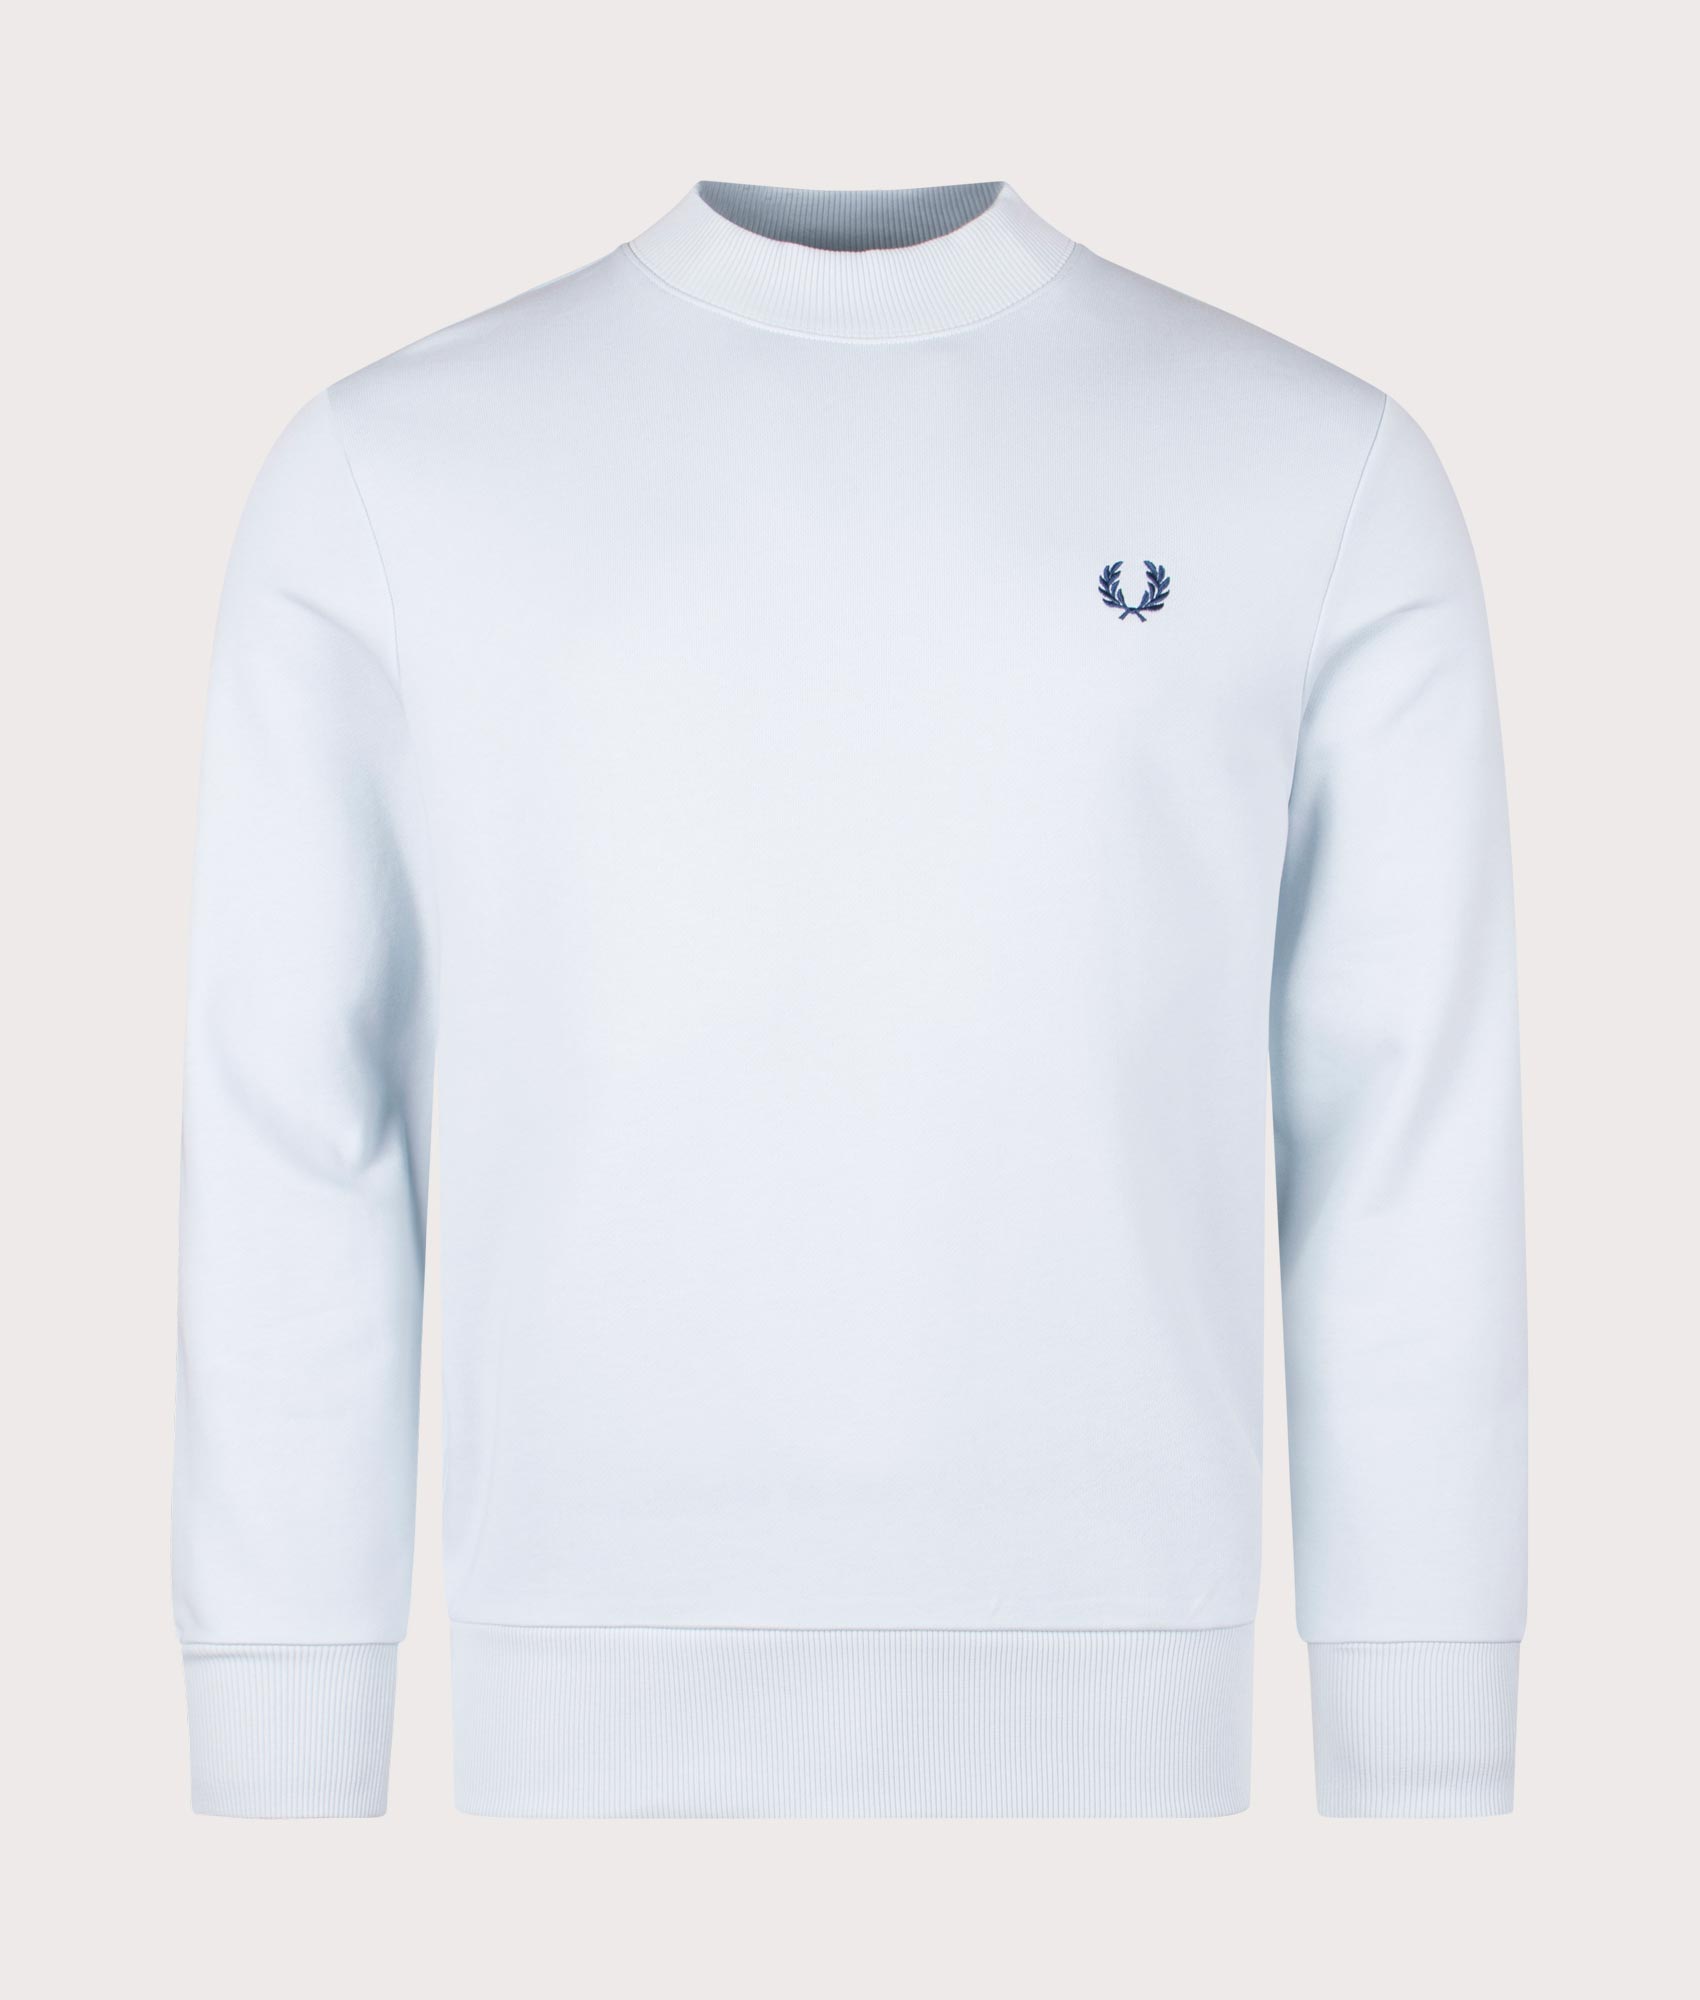 Fred Perry Mens Laurel Wreath Graphic High Neck Sweatshirt - Colour: R30 Light Ice - Size: XL